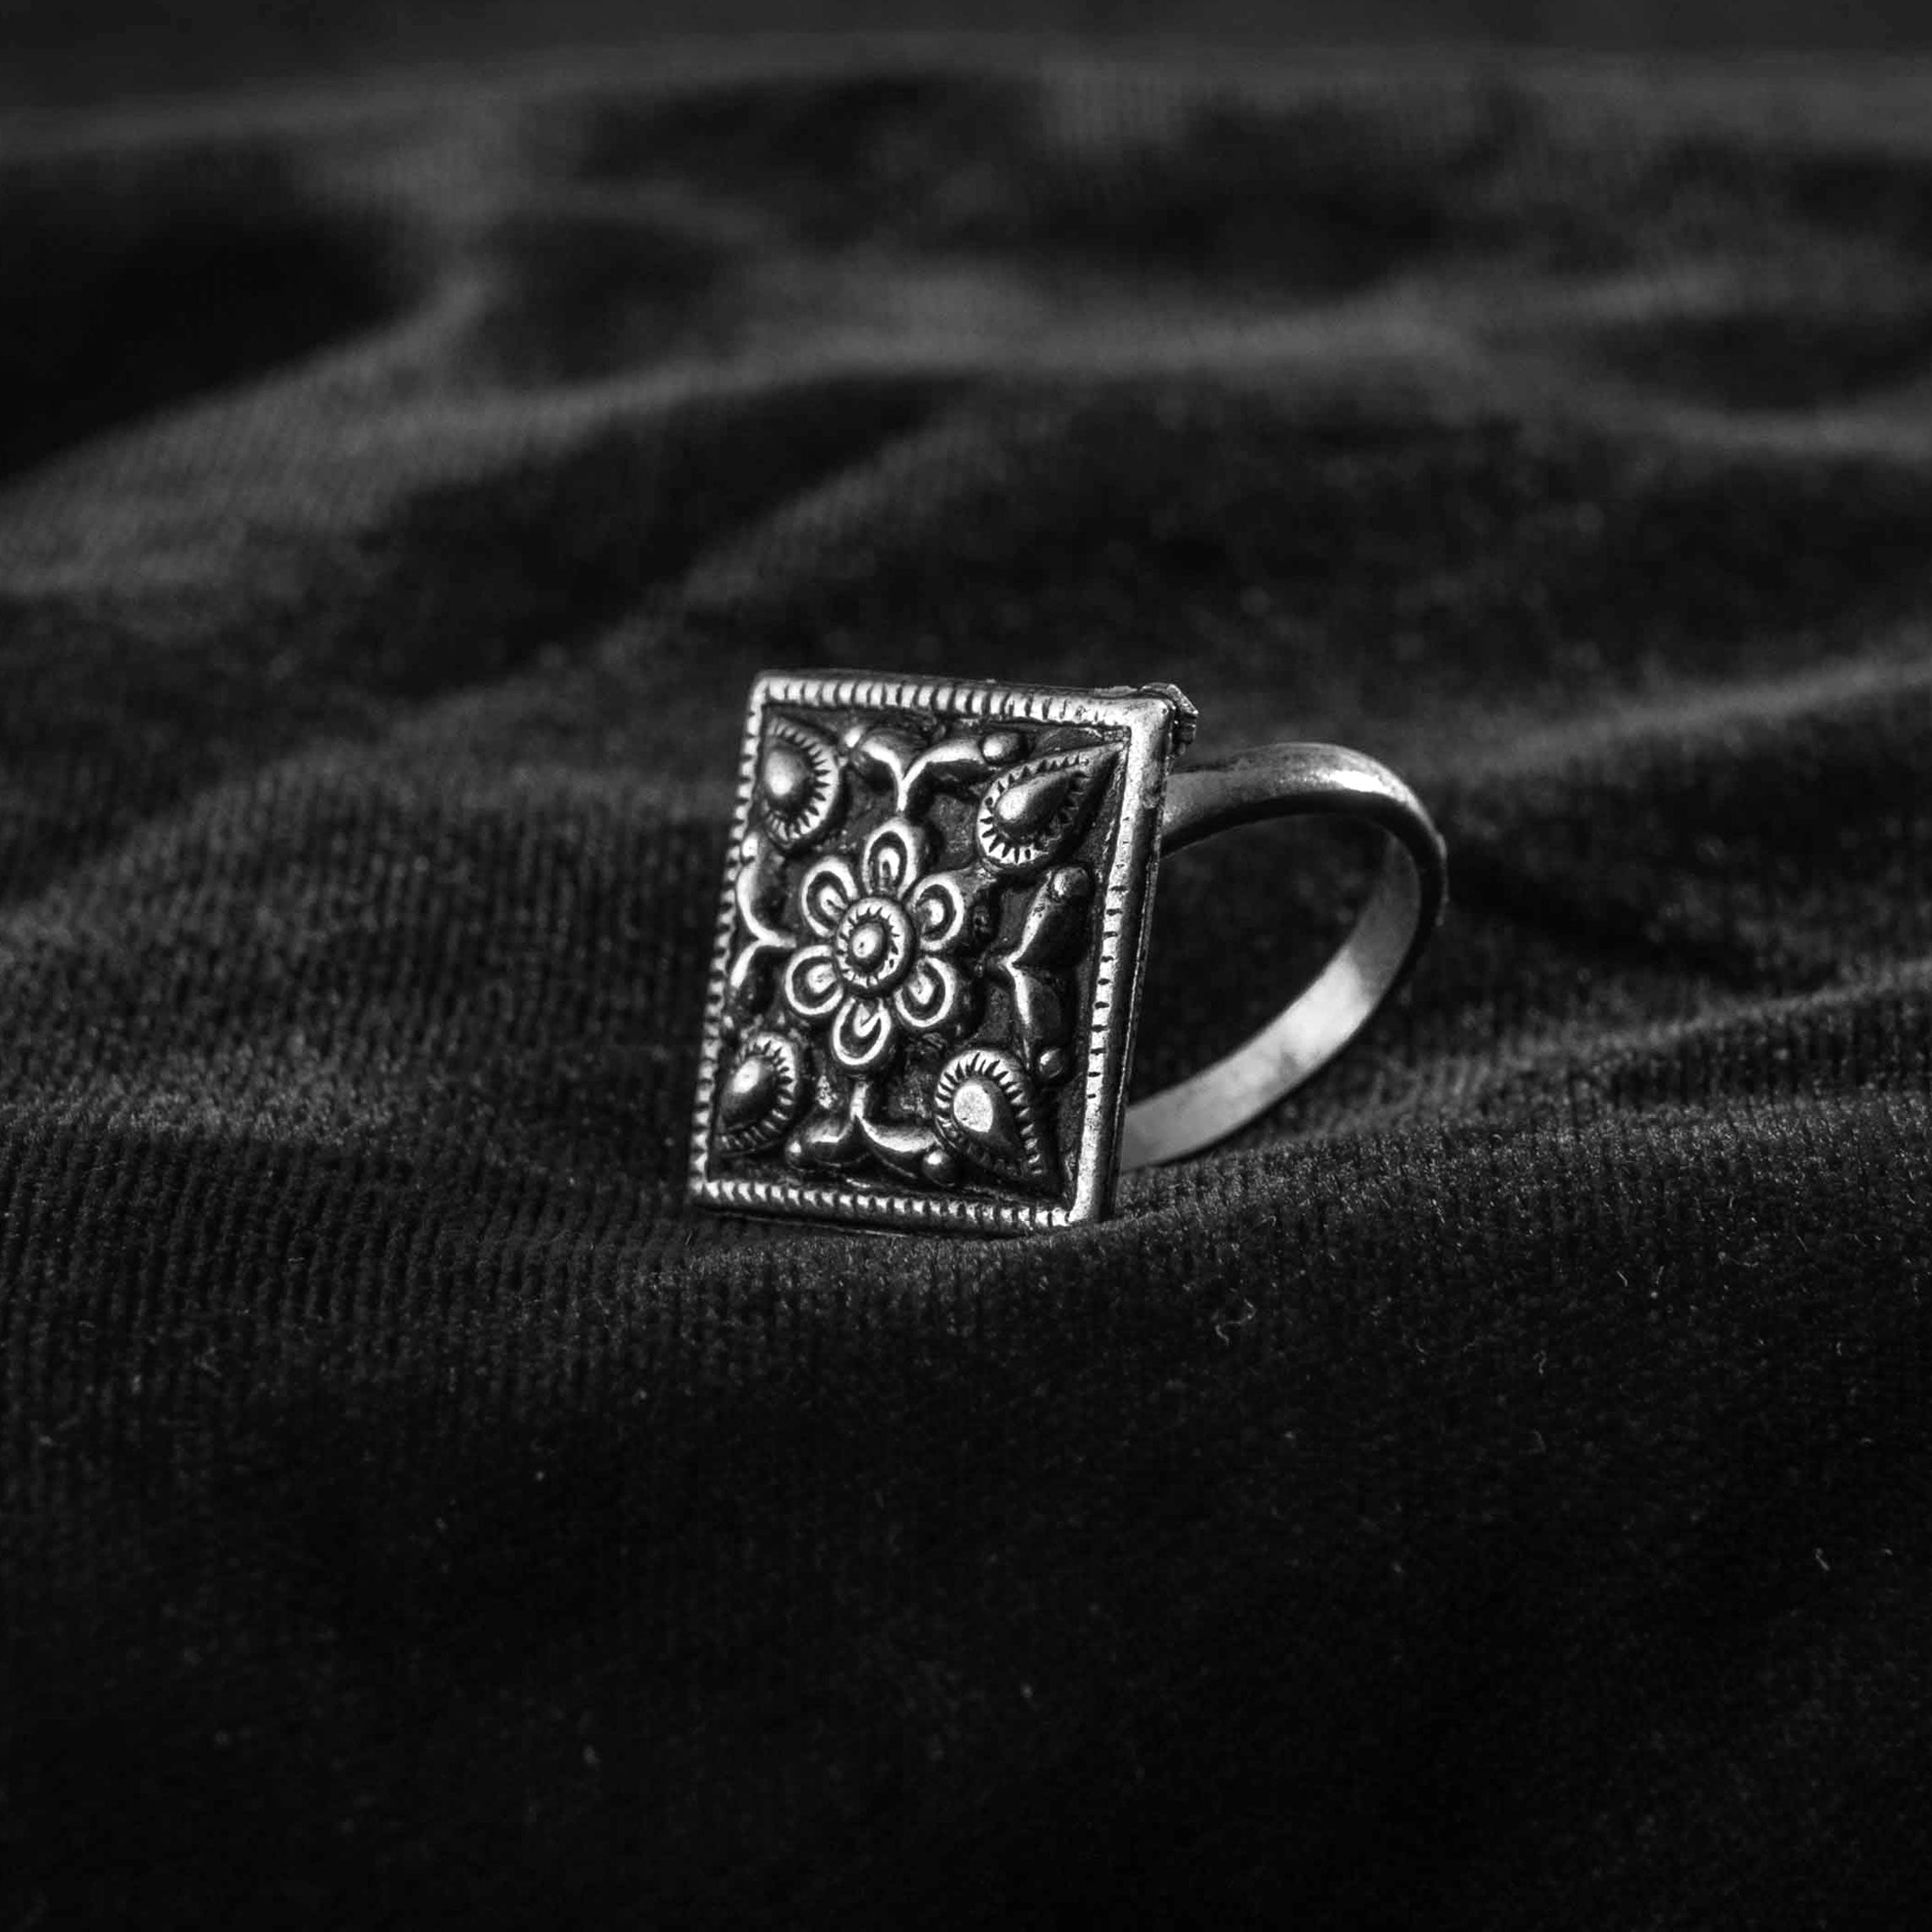 AROTOROM 925 Sterling Silver Ring with Solid Polished Rectangle Black Onyx  Ring,Black Square Stone Turkish Ottoman Signet Rings, Sterling Silver  Stone, Agate|Amazon.com